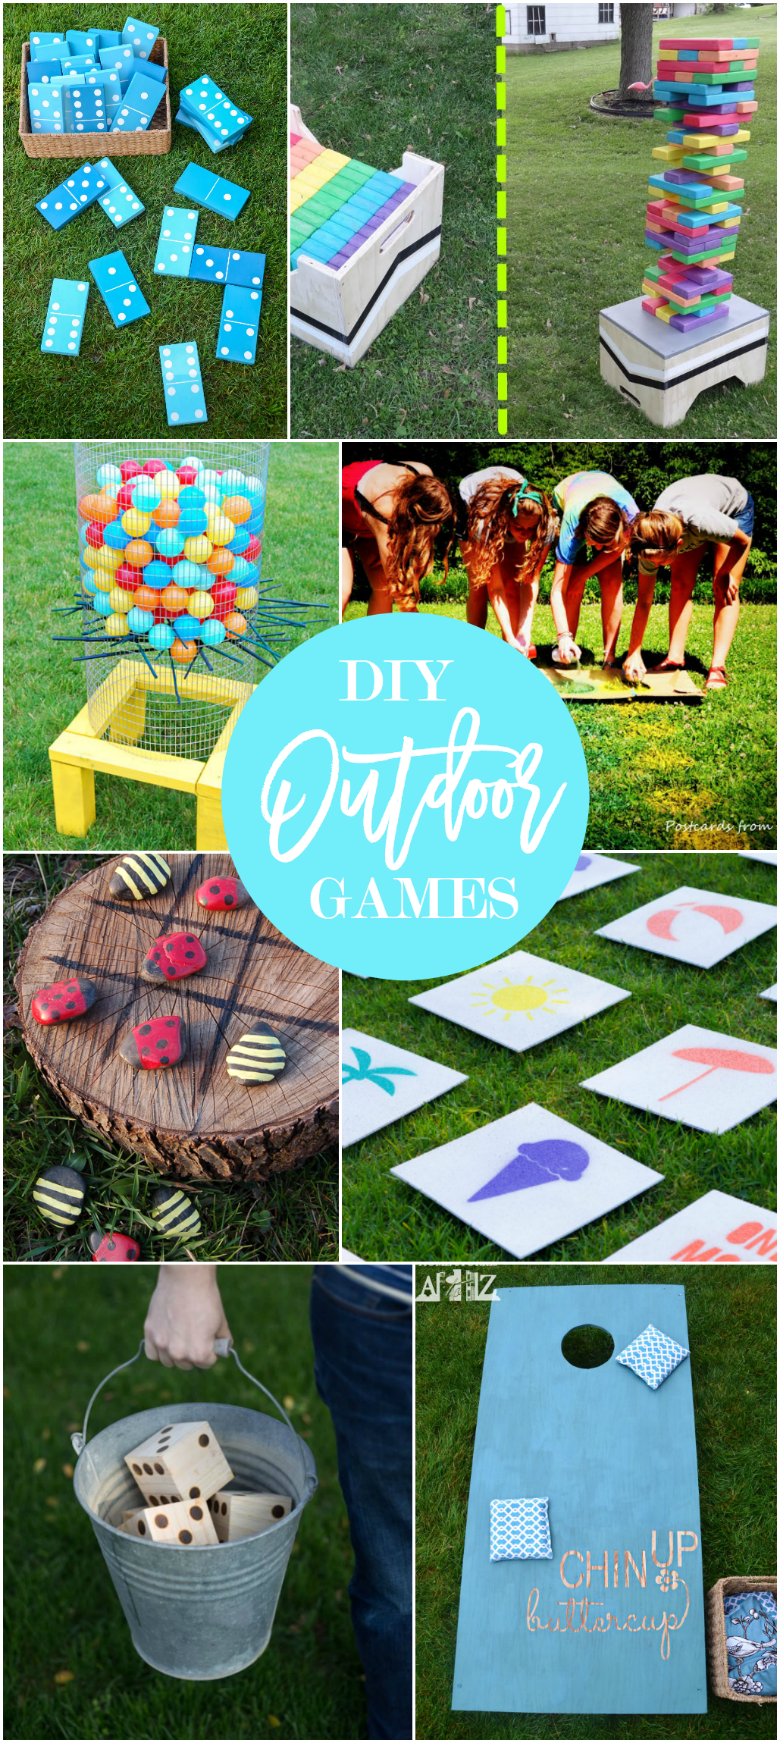 17 DIY Games for Outdoor Family Fun - Home Stories A to Z